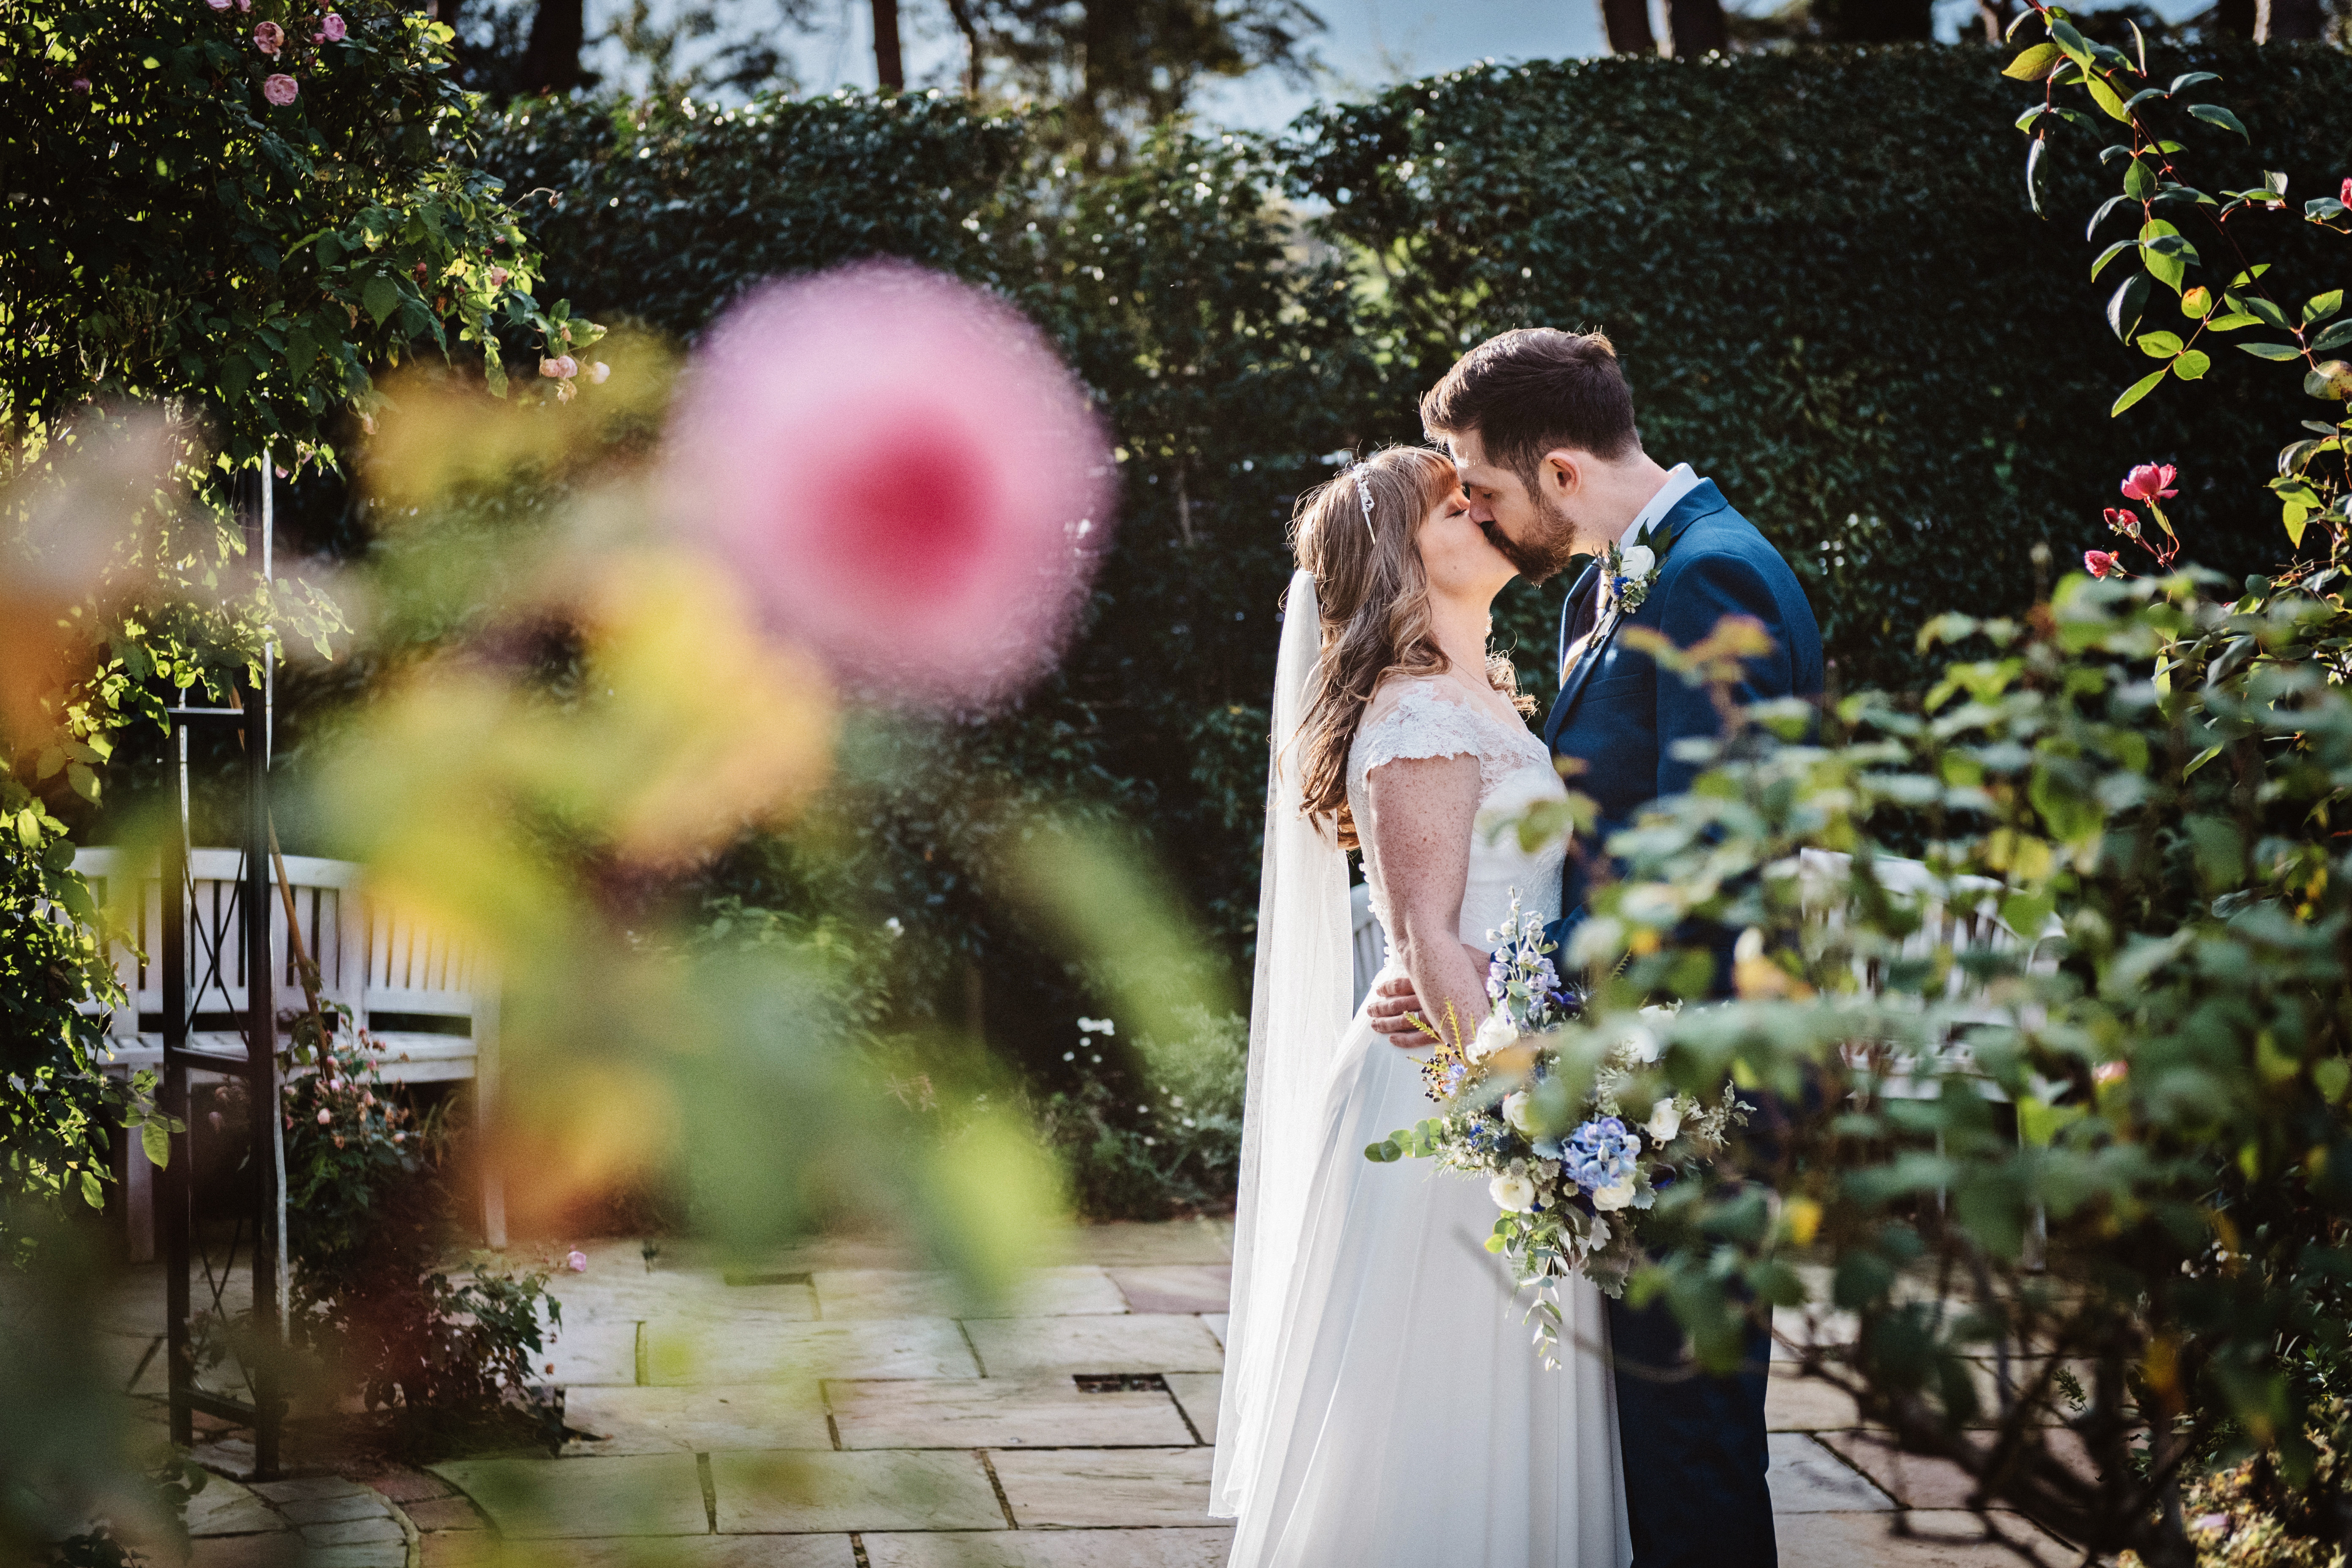 Bride and groom kiss in a gorgeous wedding garden with roses in front of them. Taken at The Kingscote Barn)